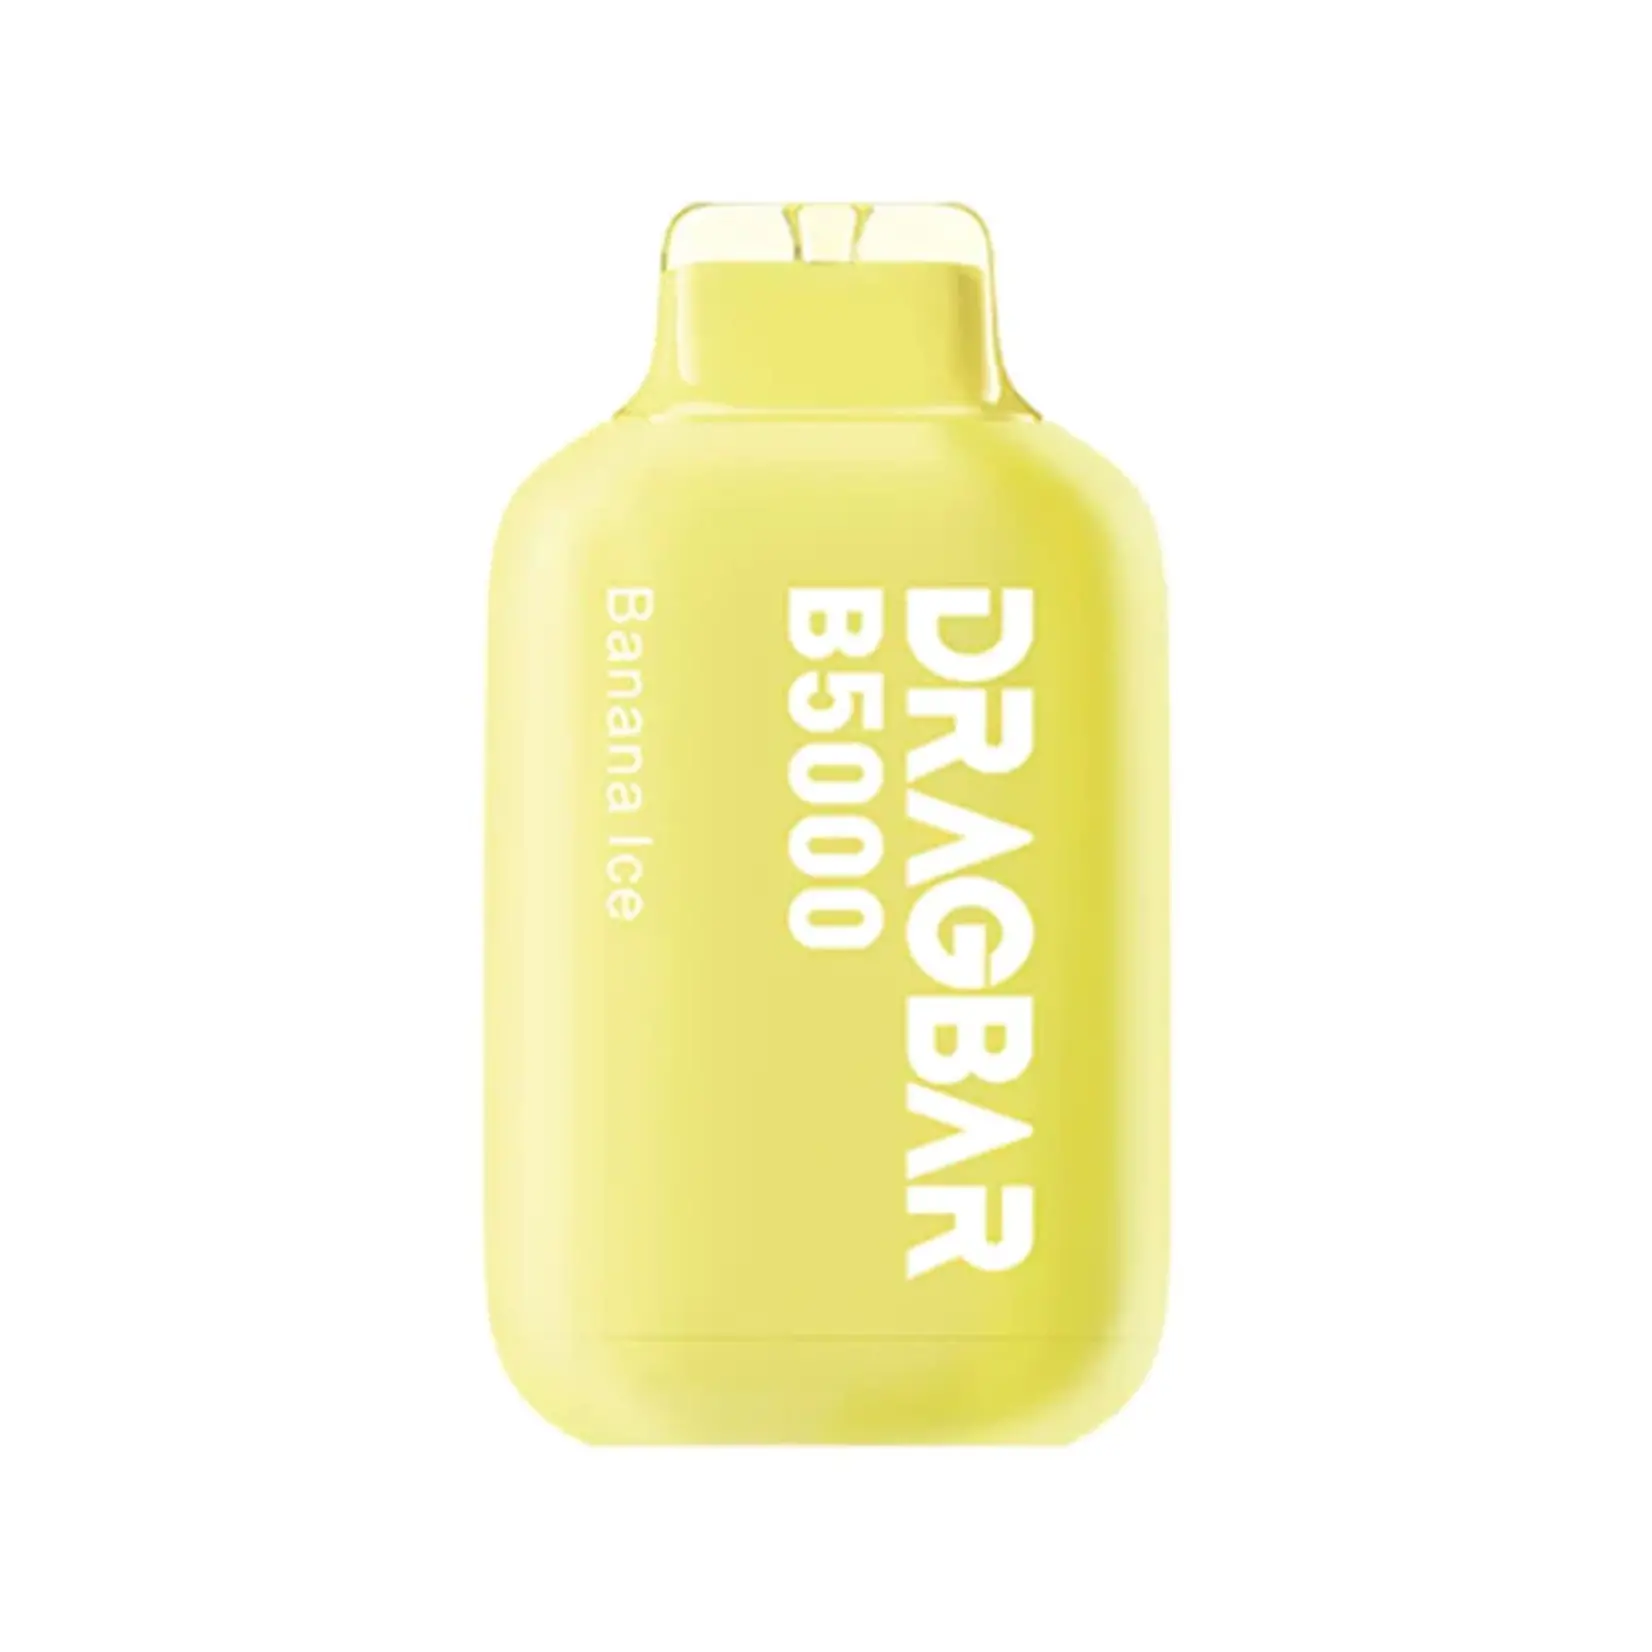 ZoVoo DragBar B5000 Disposable 5%